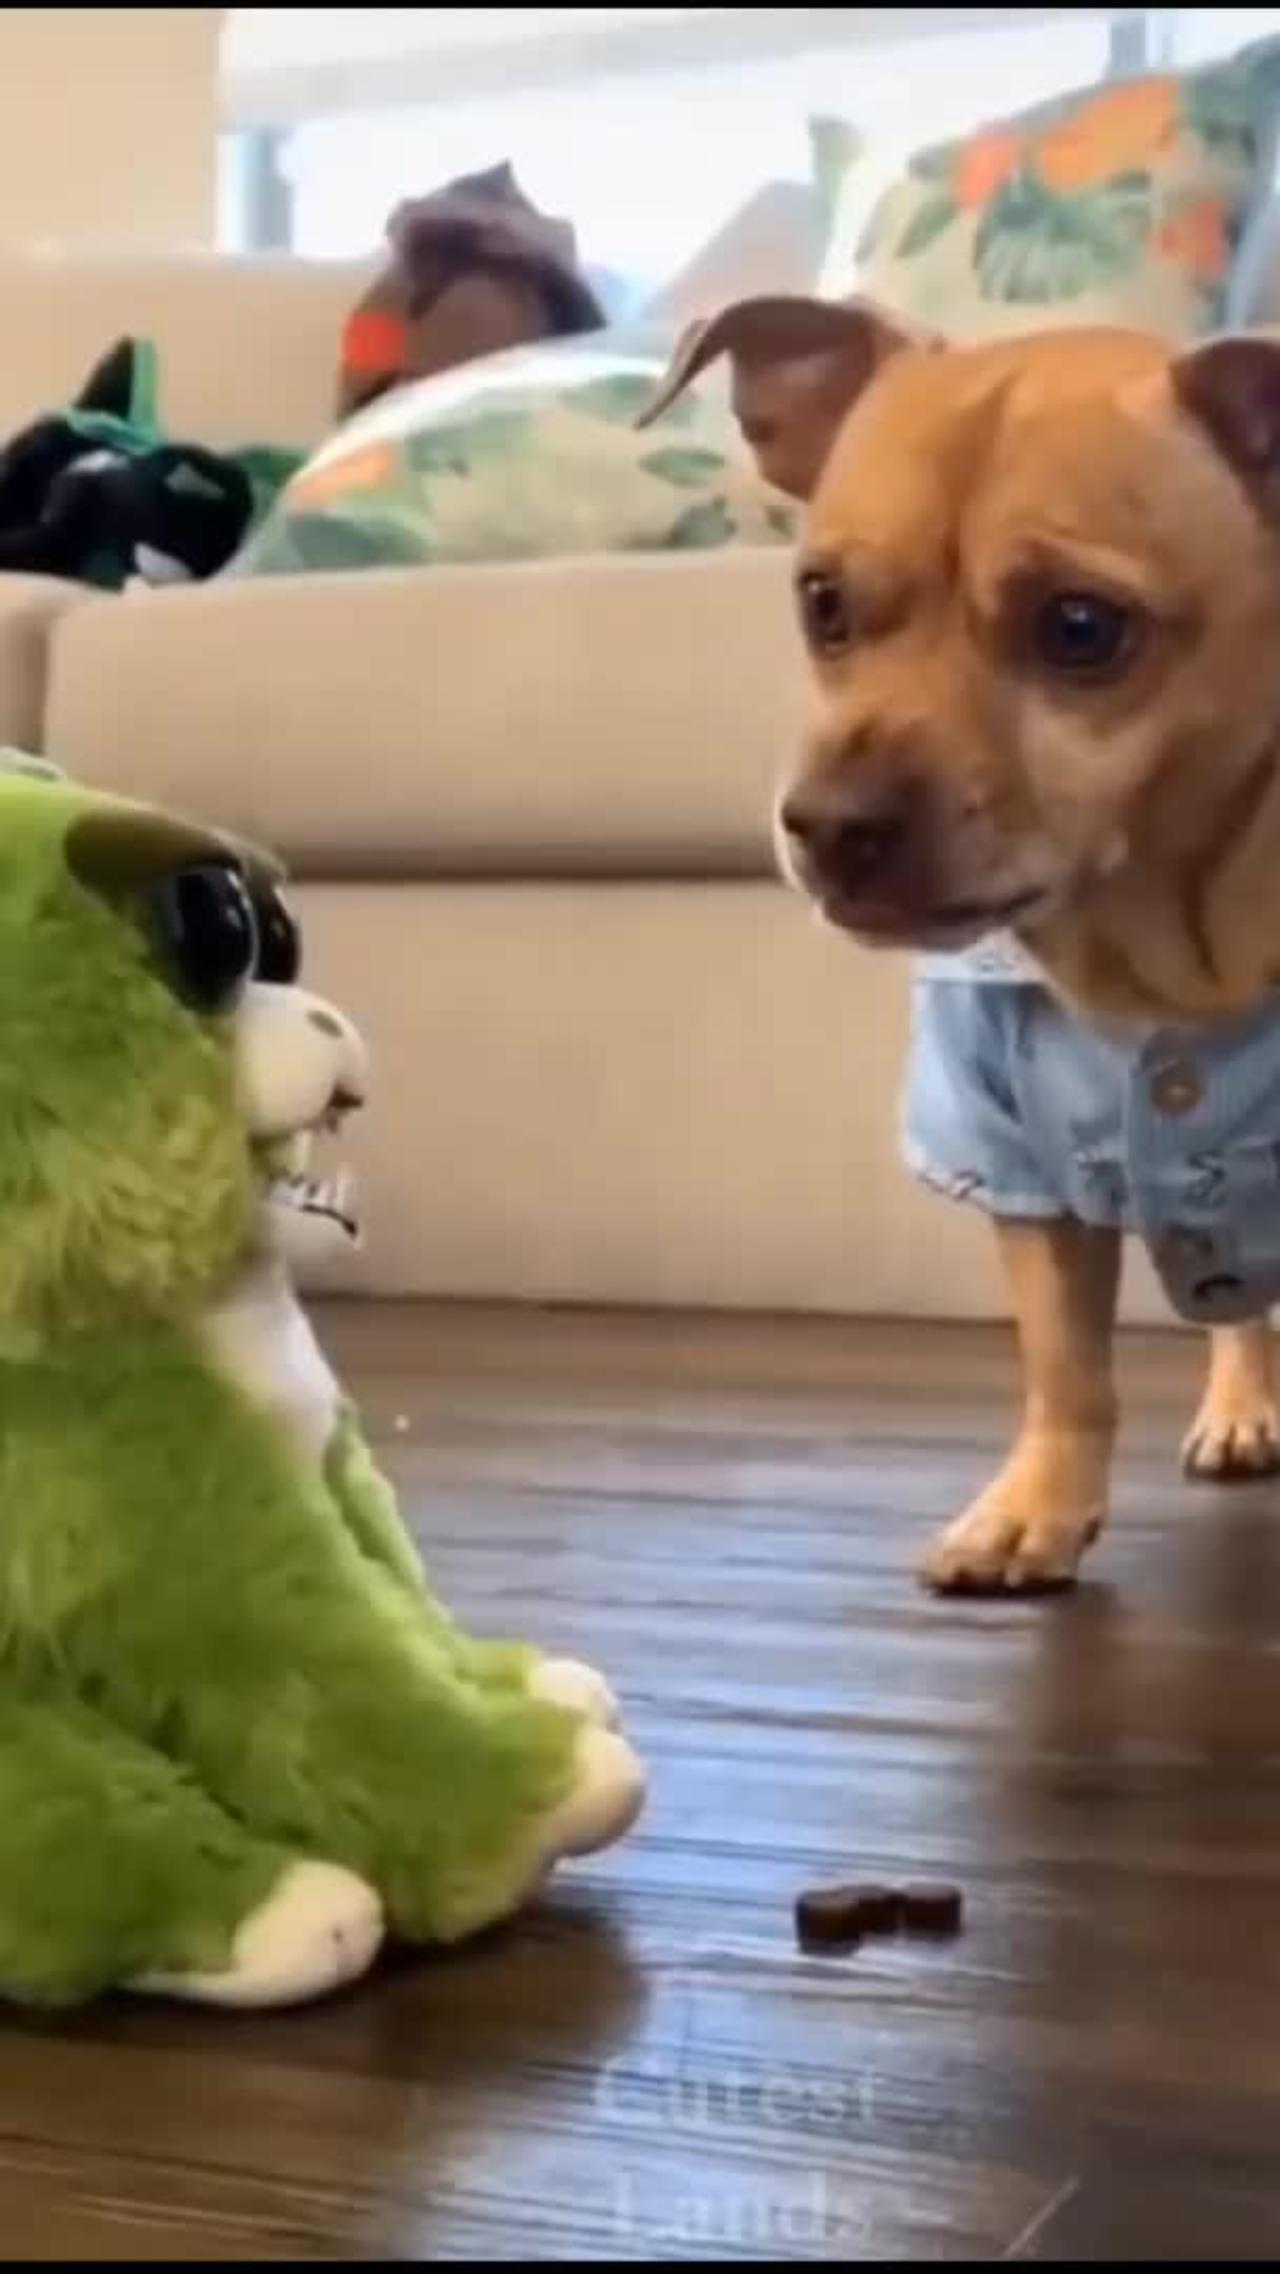 "Timid Pup Meets New Toy." or "Too Cute to Handle: Scared Puppy Meets Playtime".